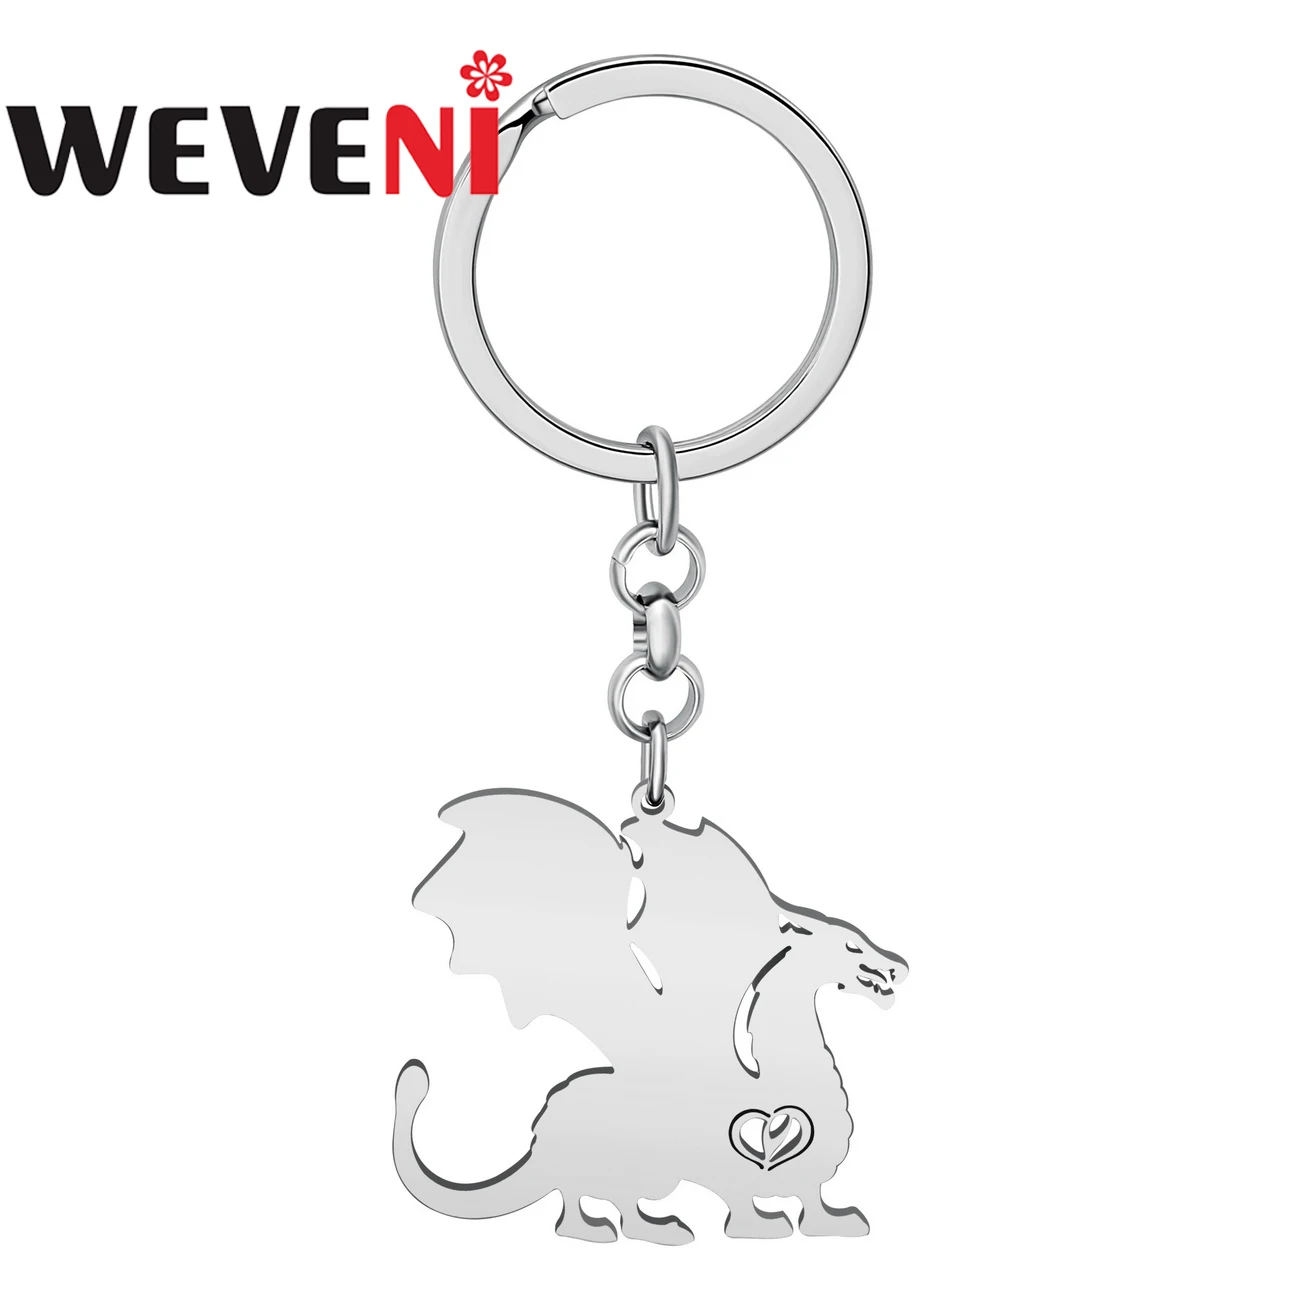 

WEVENI Key Ring Stainless Steel Silver-plated Roaring Dinosaur Dragon Keychains Car Key Bag Jewelry For Women Girls Party Gift